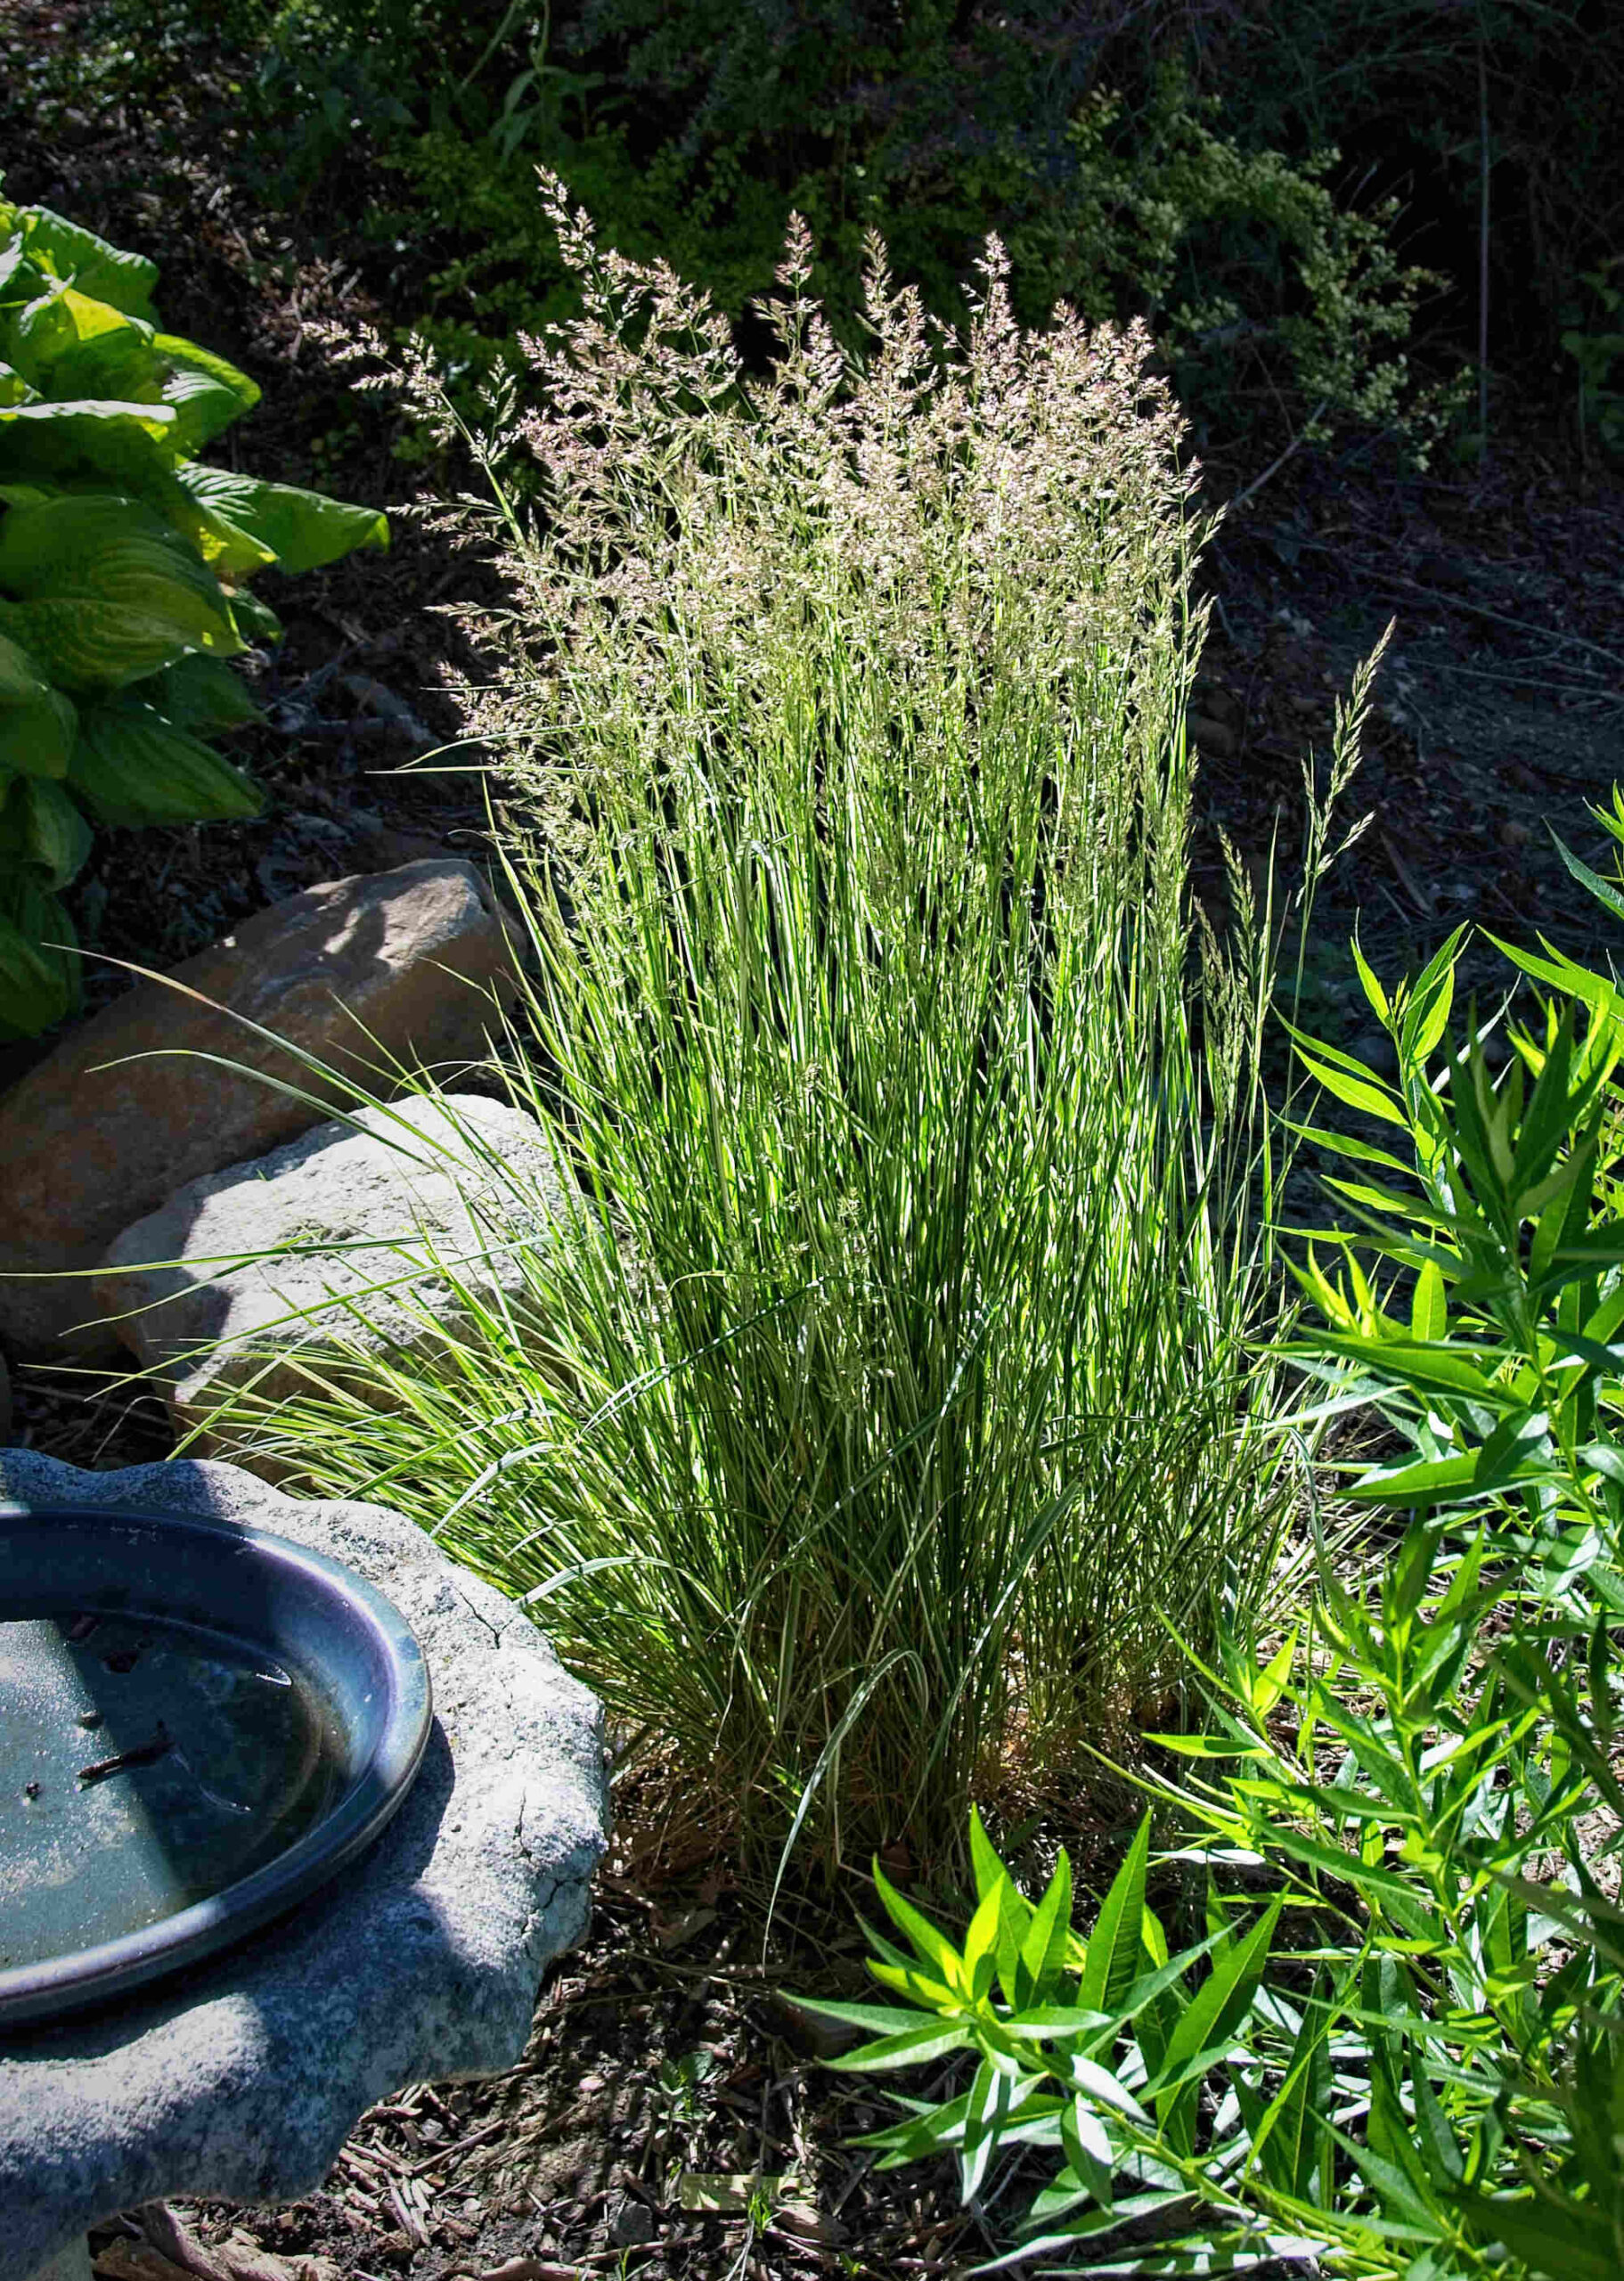 Photograph of feather reed grass. The grass is tall and skinny. It is an ornamental decorative grass. The image shows the grass placed next to a fountain. The pink spiklets at the top are pretty.